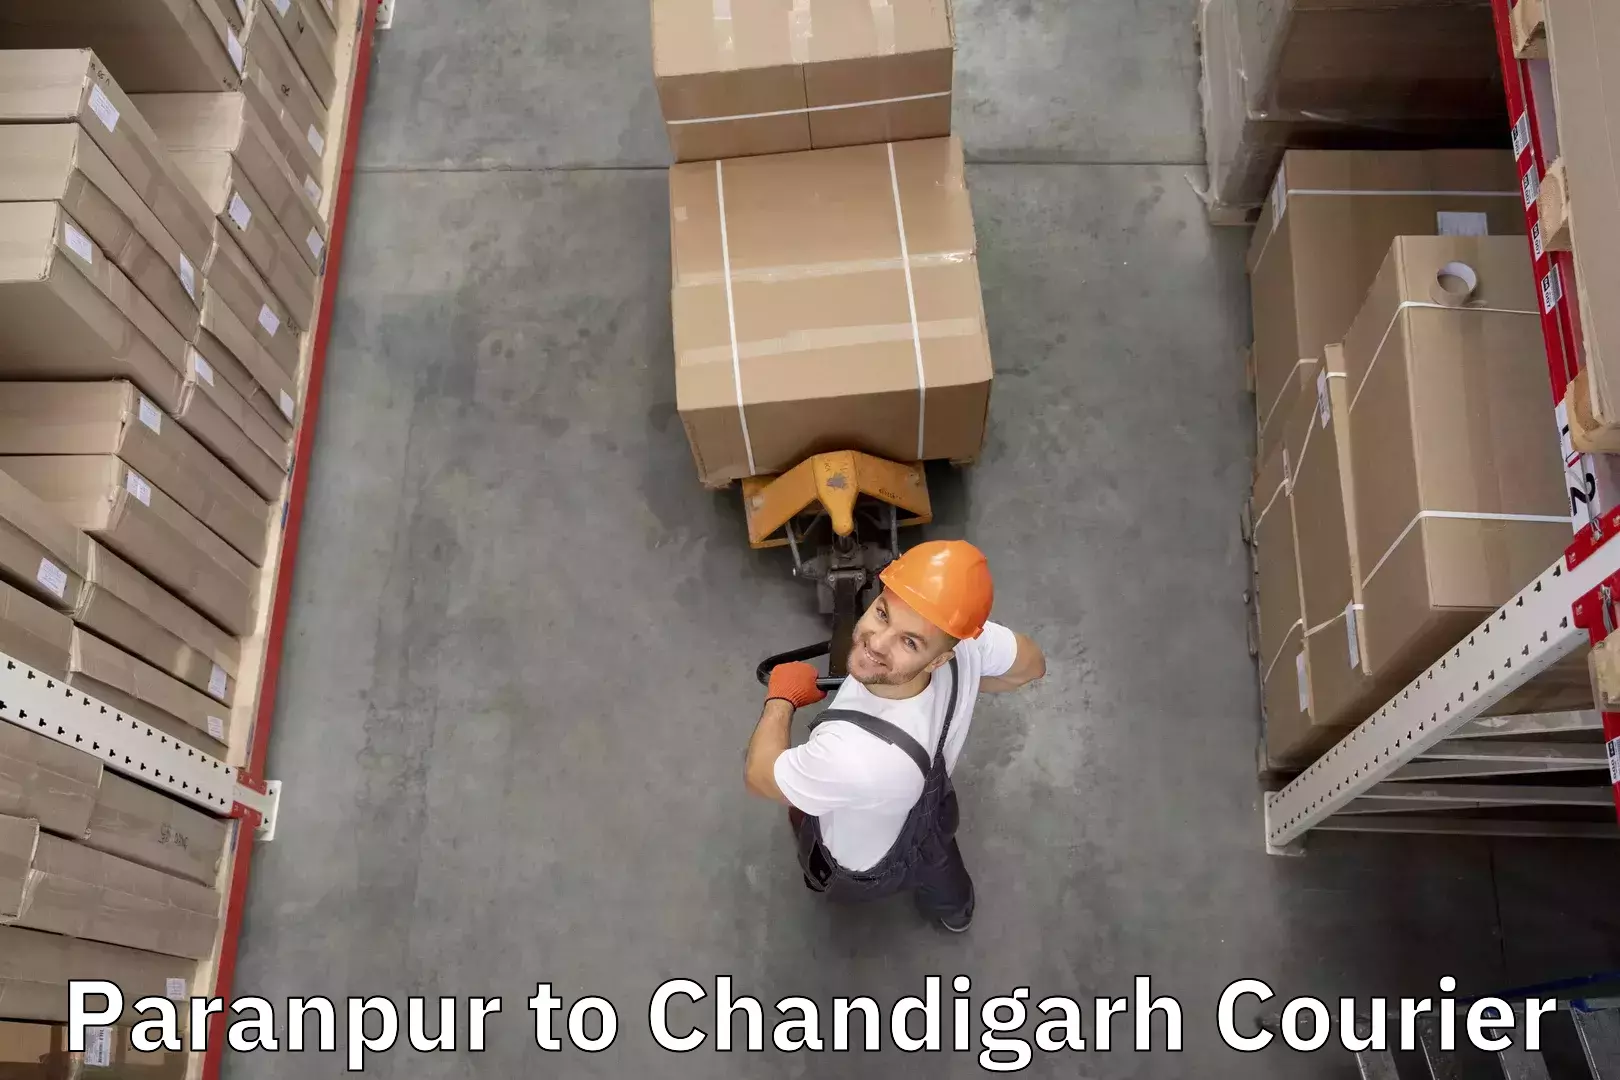 Luggage transport consultancy Paranpur to Chandigarh